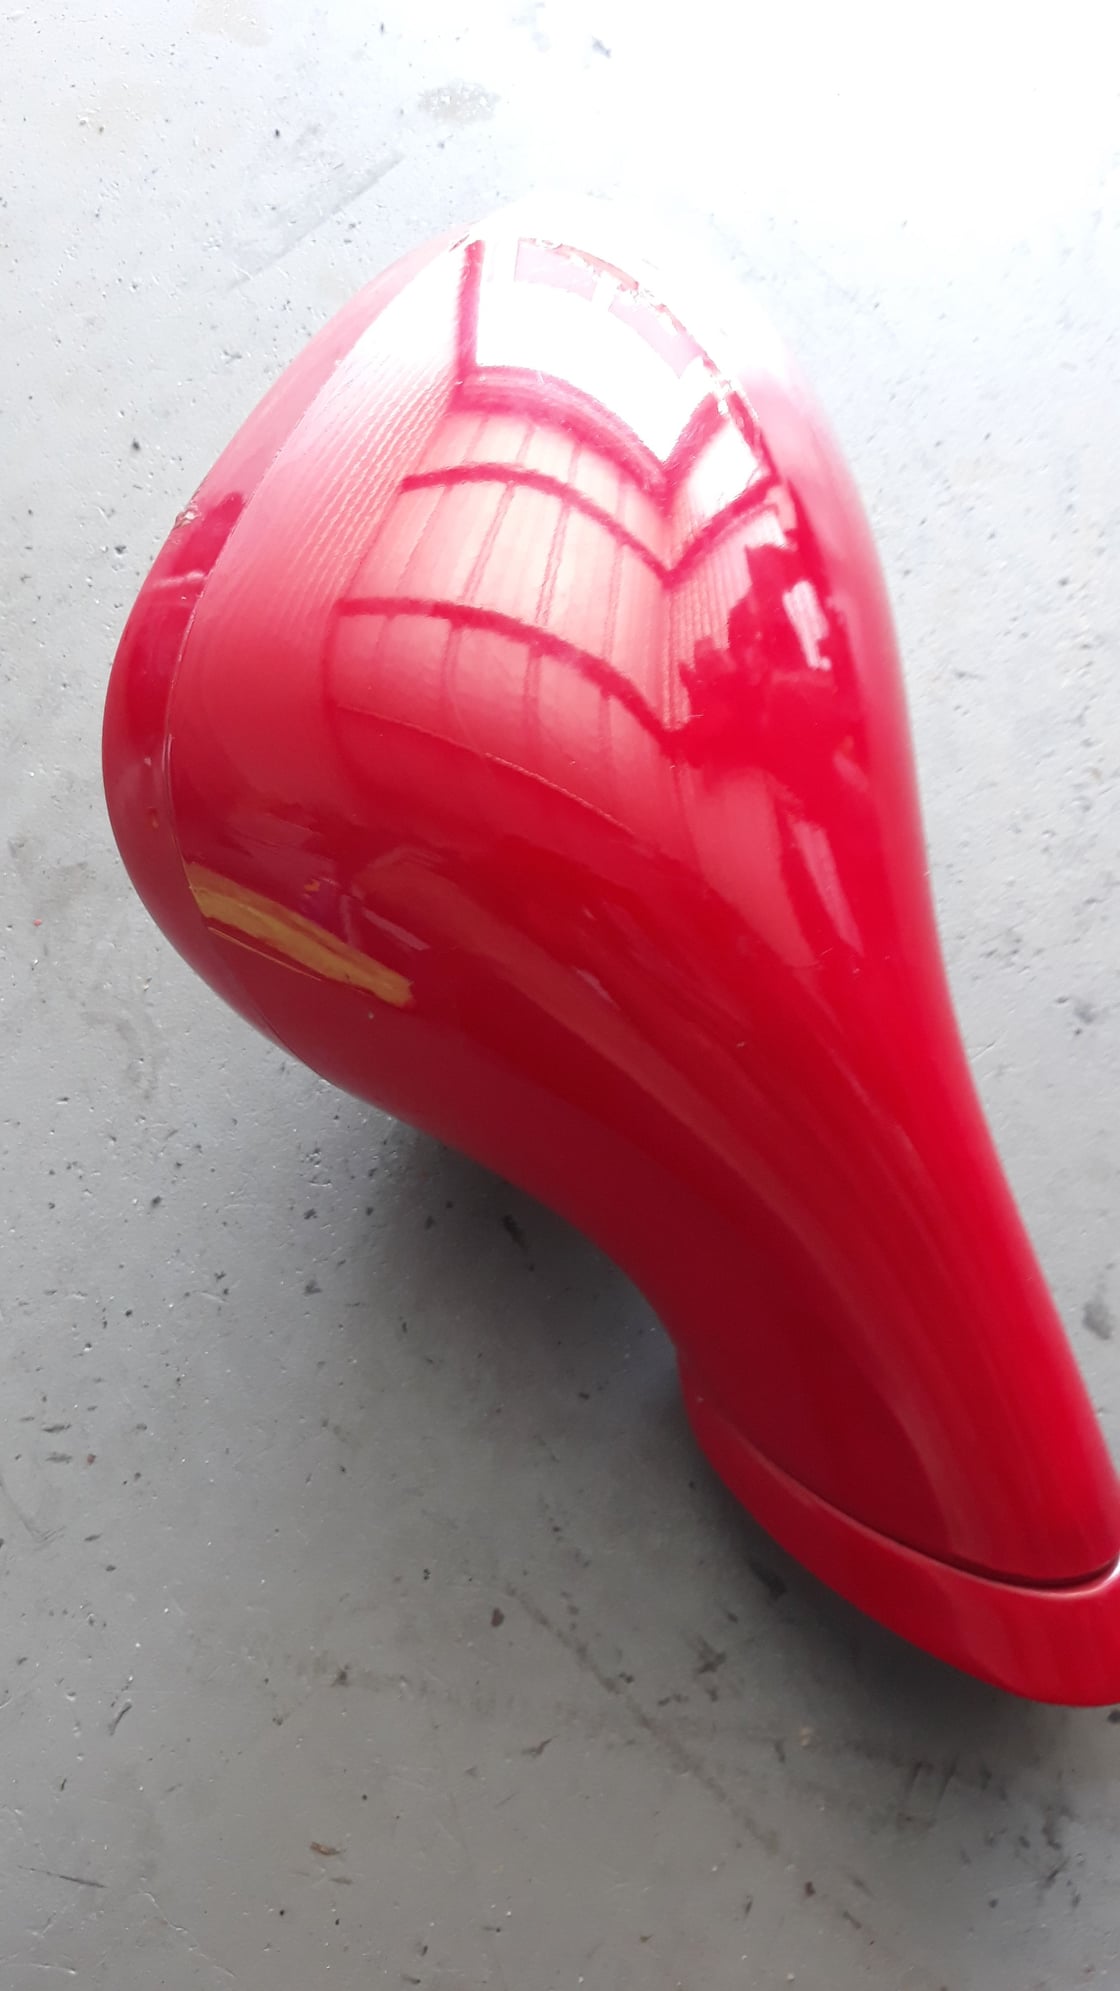 Exterior Body Parts - OEM side mirrors - Used - 1992 to 2002 Mazda RX-7 - Orlando, FL 32824, United States